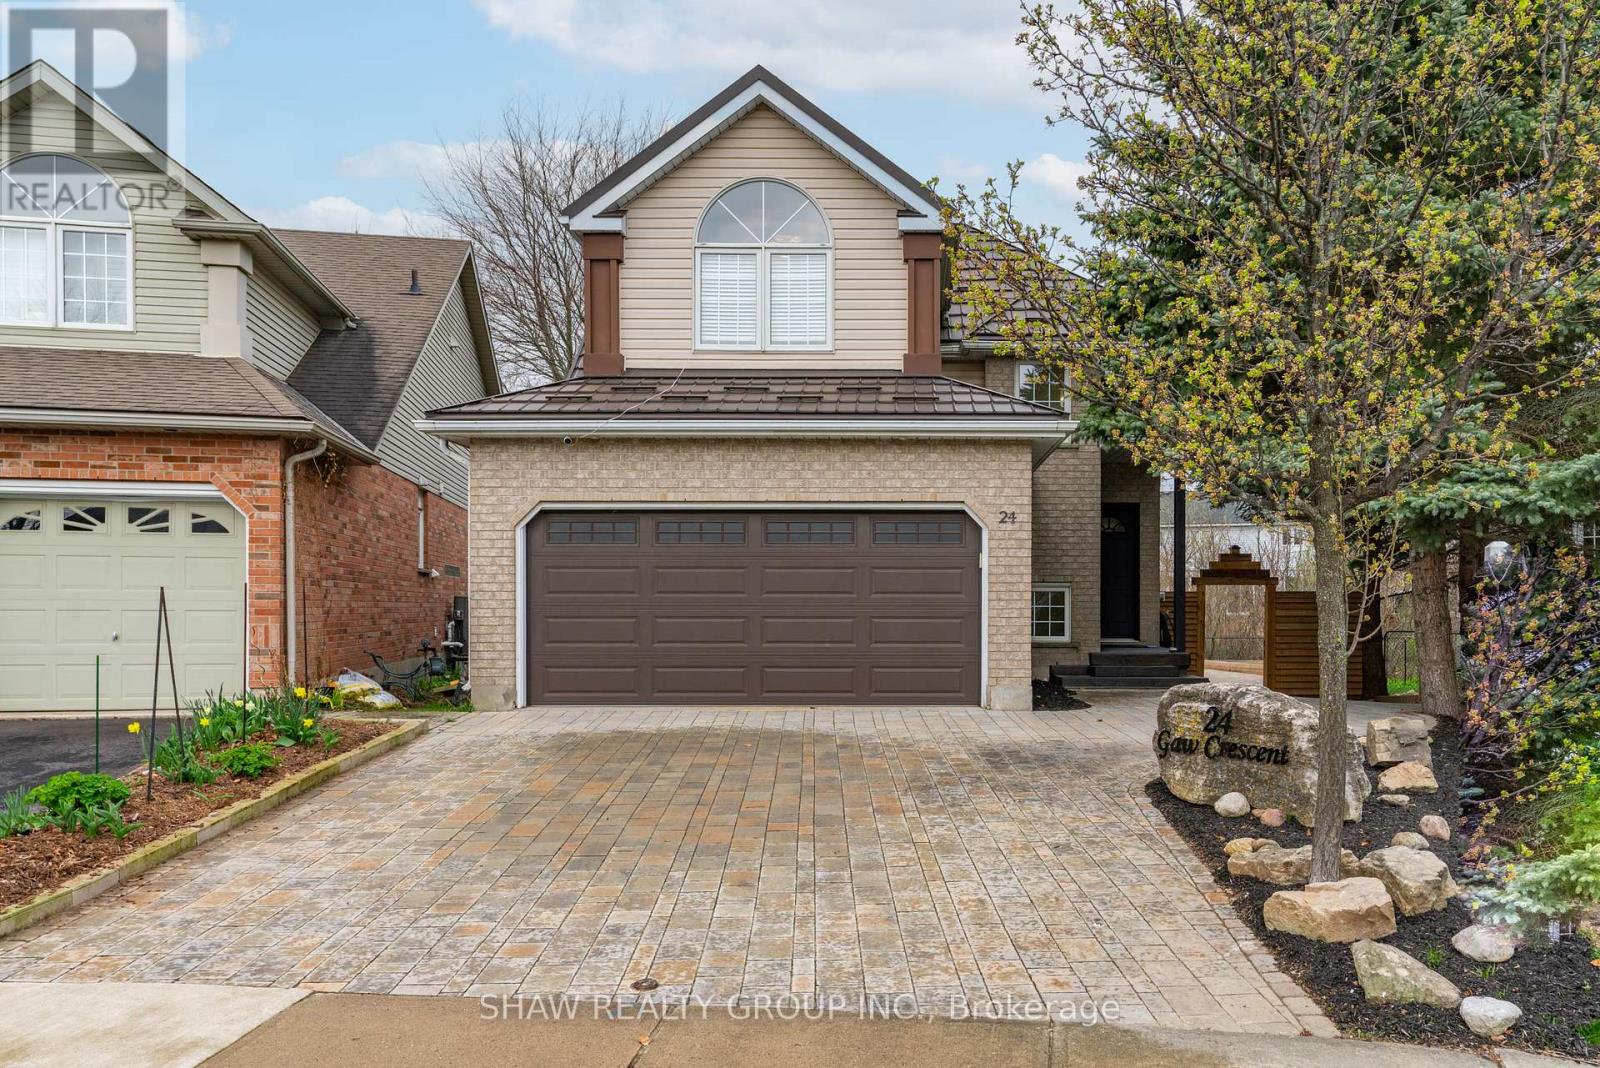 24 GAW CRESCENT, guelph, Ontario